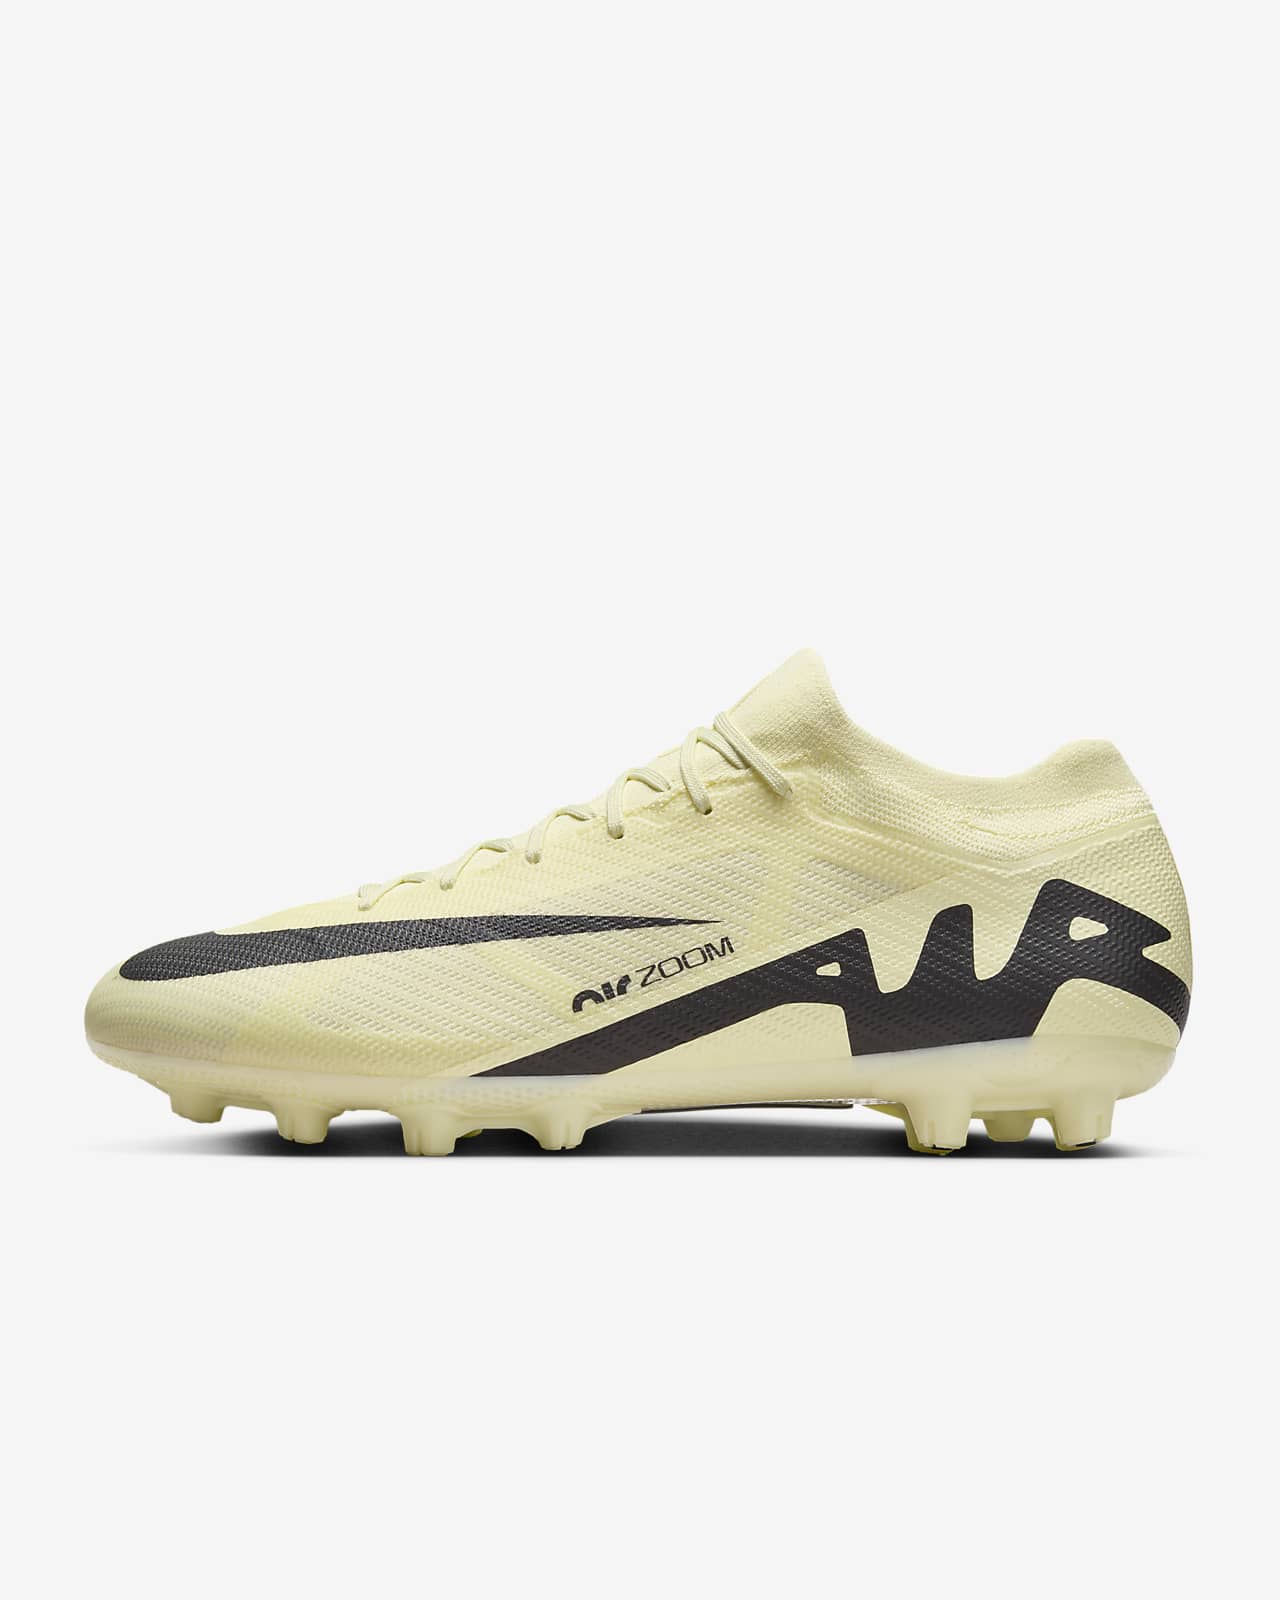 Nike Mercurial Vapor 15 Pro Hard-Ground Low-Top Soccer Cleat